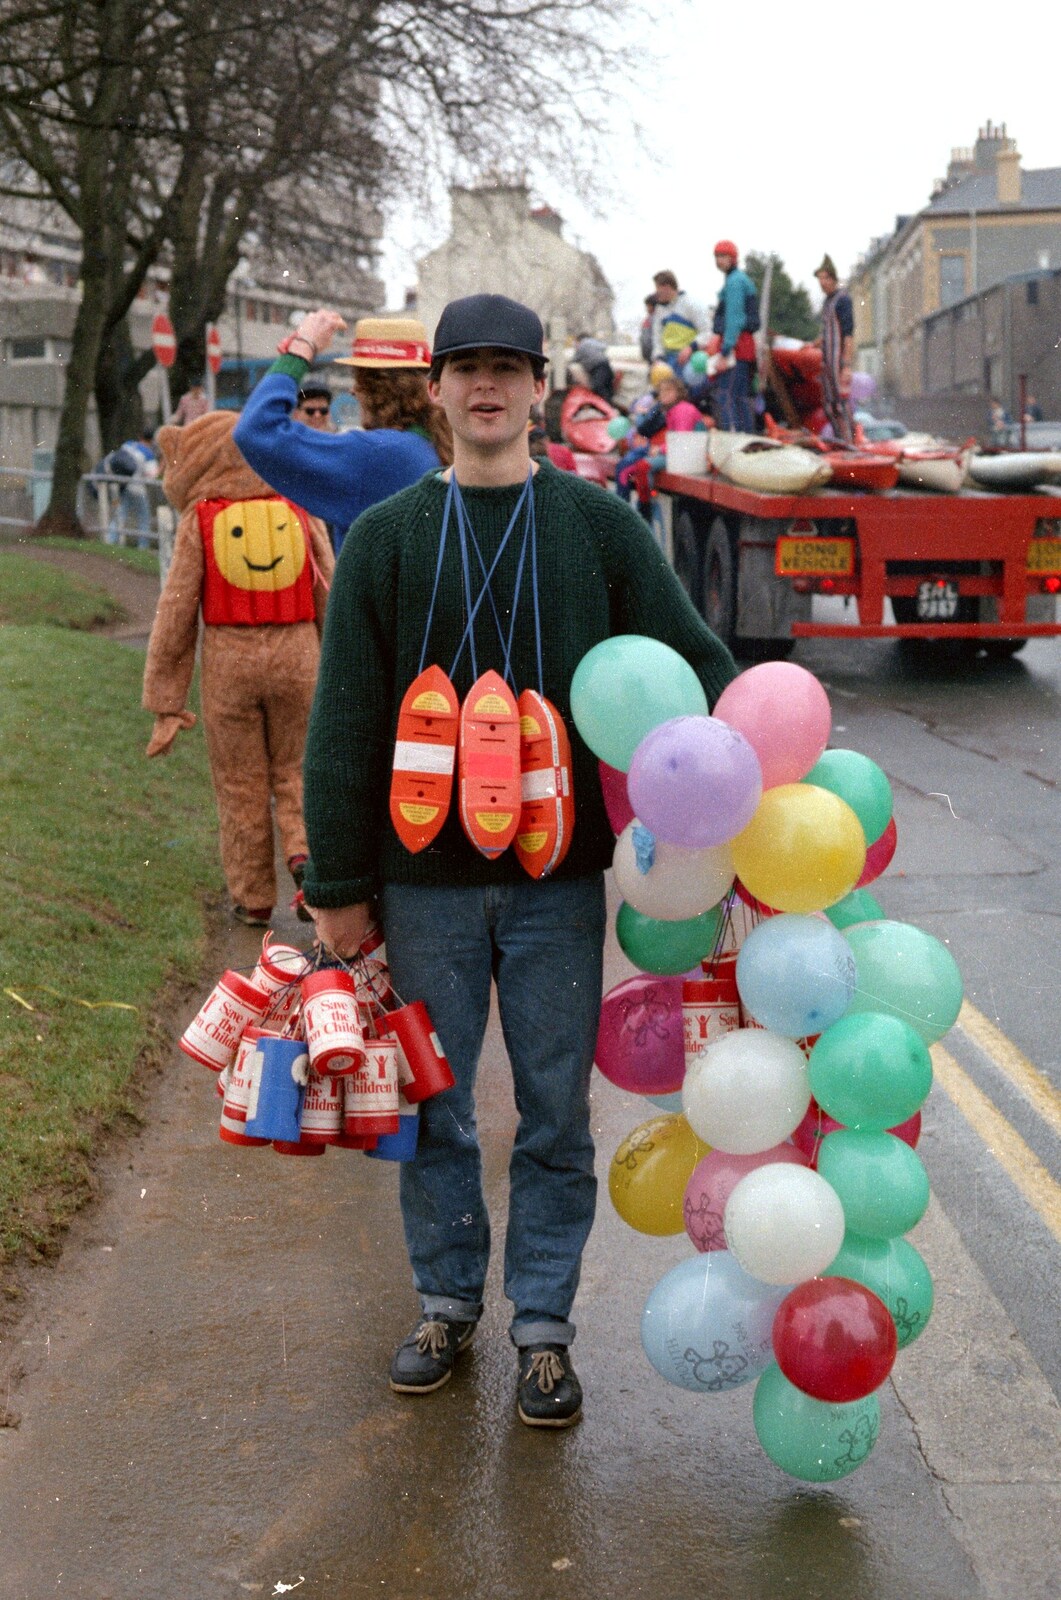 A dude with a load of balloons, on Portland Place from Uni: The PPSU Pirate RAG Parade, Plymouth, Devon - 14th February 1987